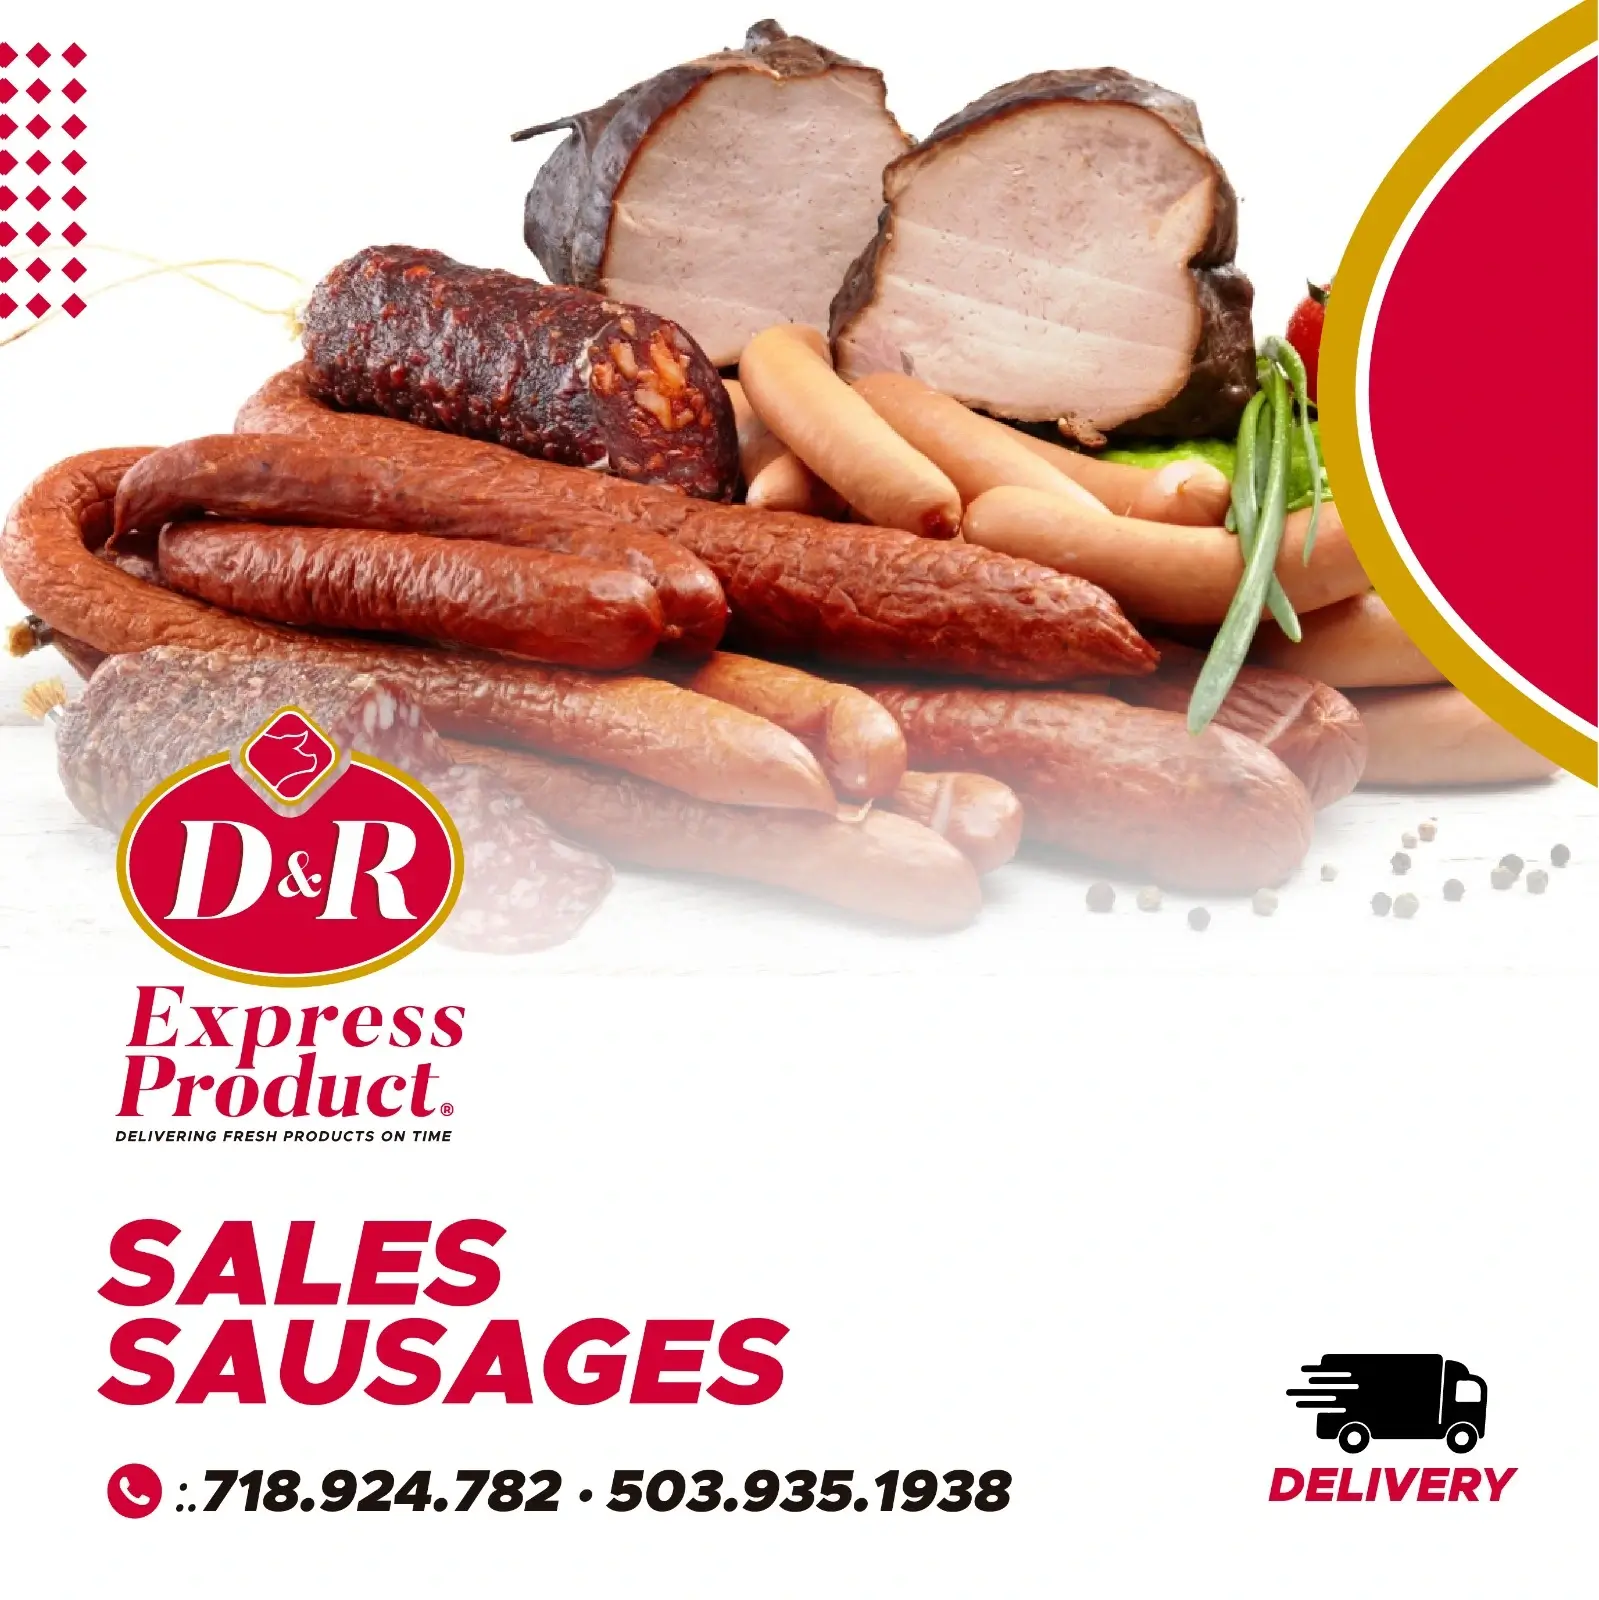 D&R Express Product Product